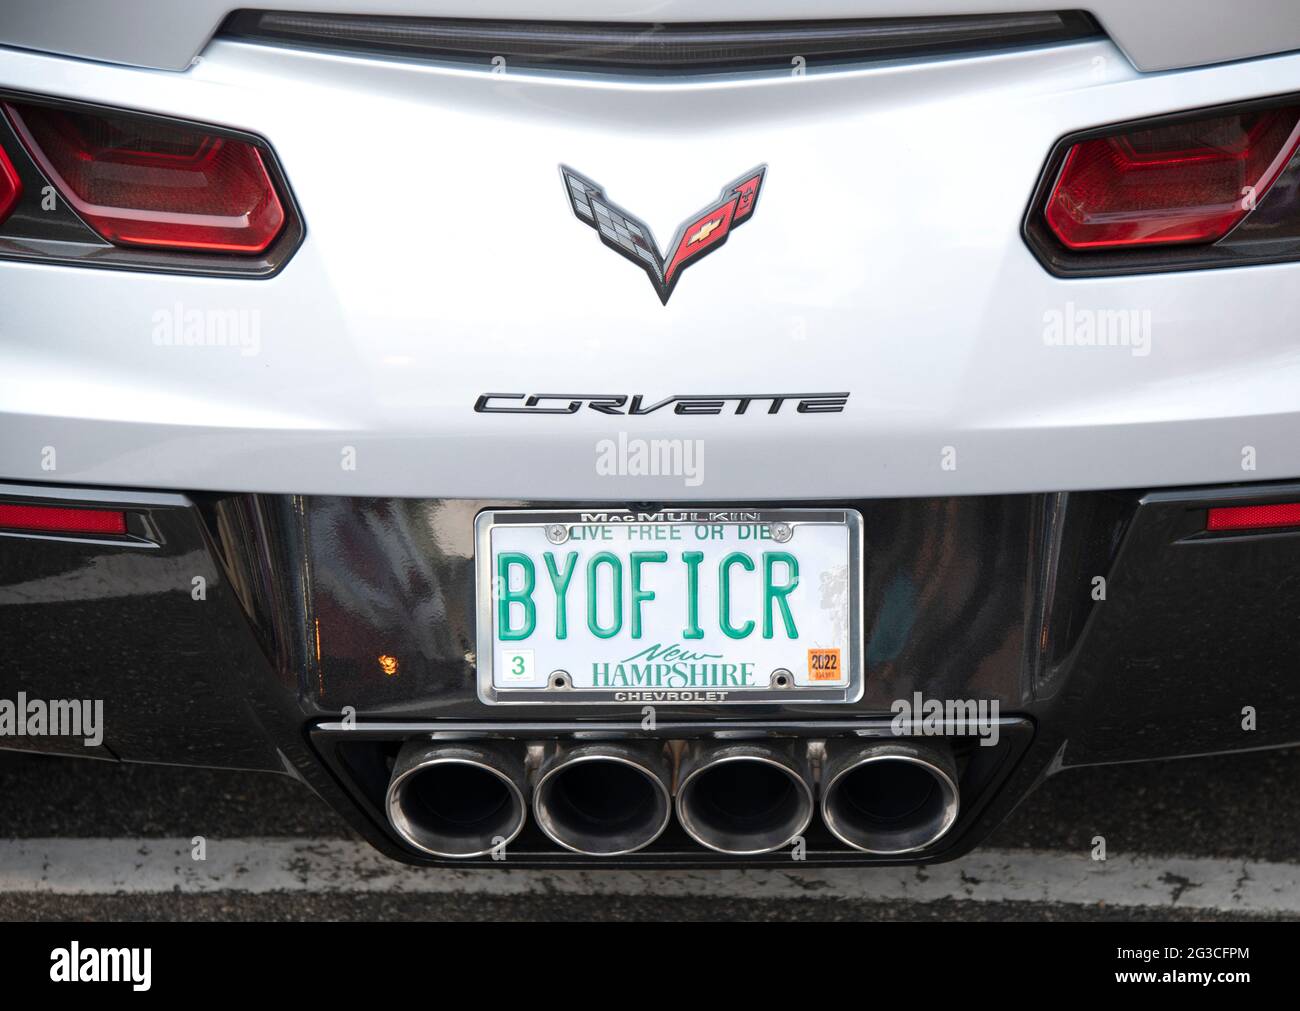 a license plate with a message 'BYOFFICER' on a Corvette parked on a street in Ogunquit, Maine, USA Stock Photo